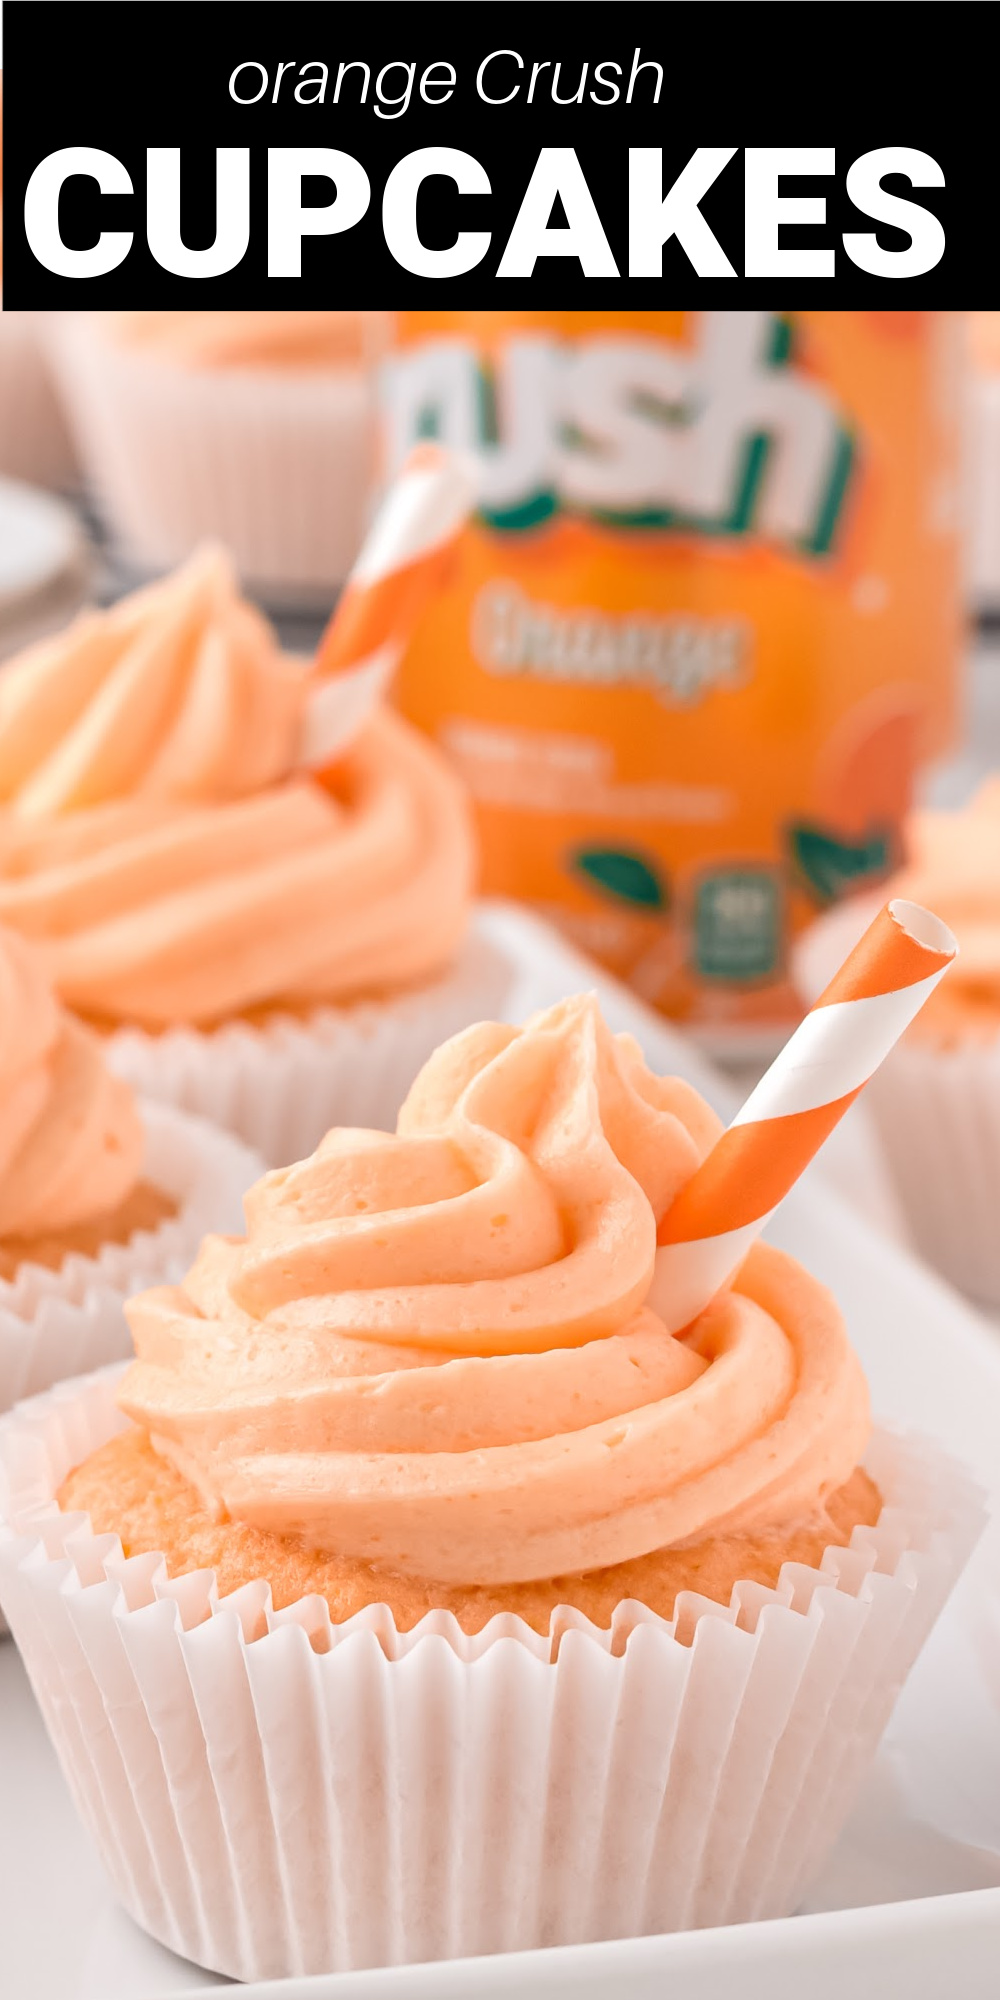 Orange Crush Cupcakes are soft, fluffy and moist cupcakes made with only two ingredients - a vanilla cake mix and a can of sweet and delicious orange Crush soda. This recipe is so great to have on hand when you need cupcakes in a pinch, and it’s so fun to make these with the kids!